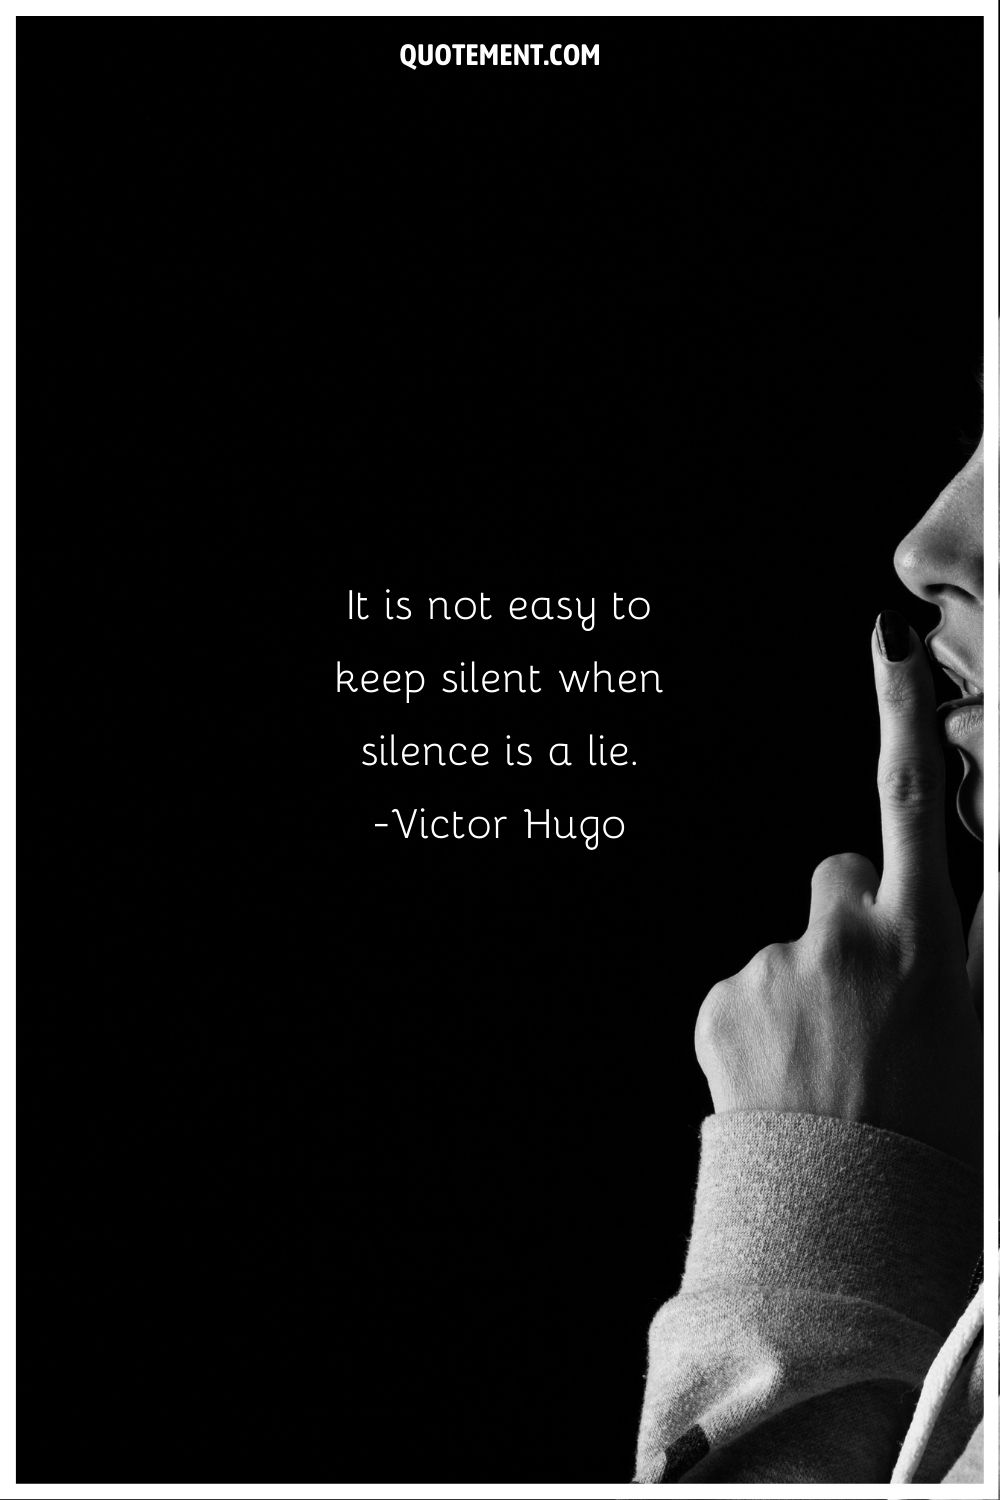 “It is not easy to keep silent when silence is a lie.” ― Victor Hugo